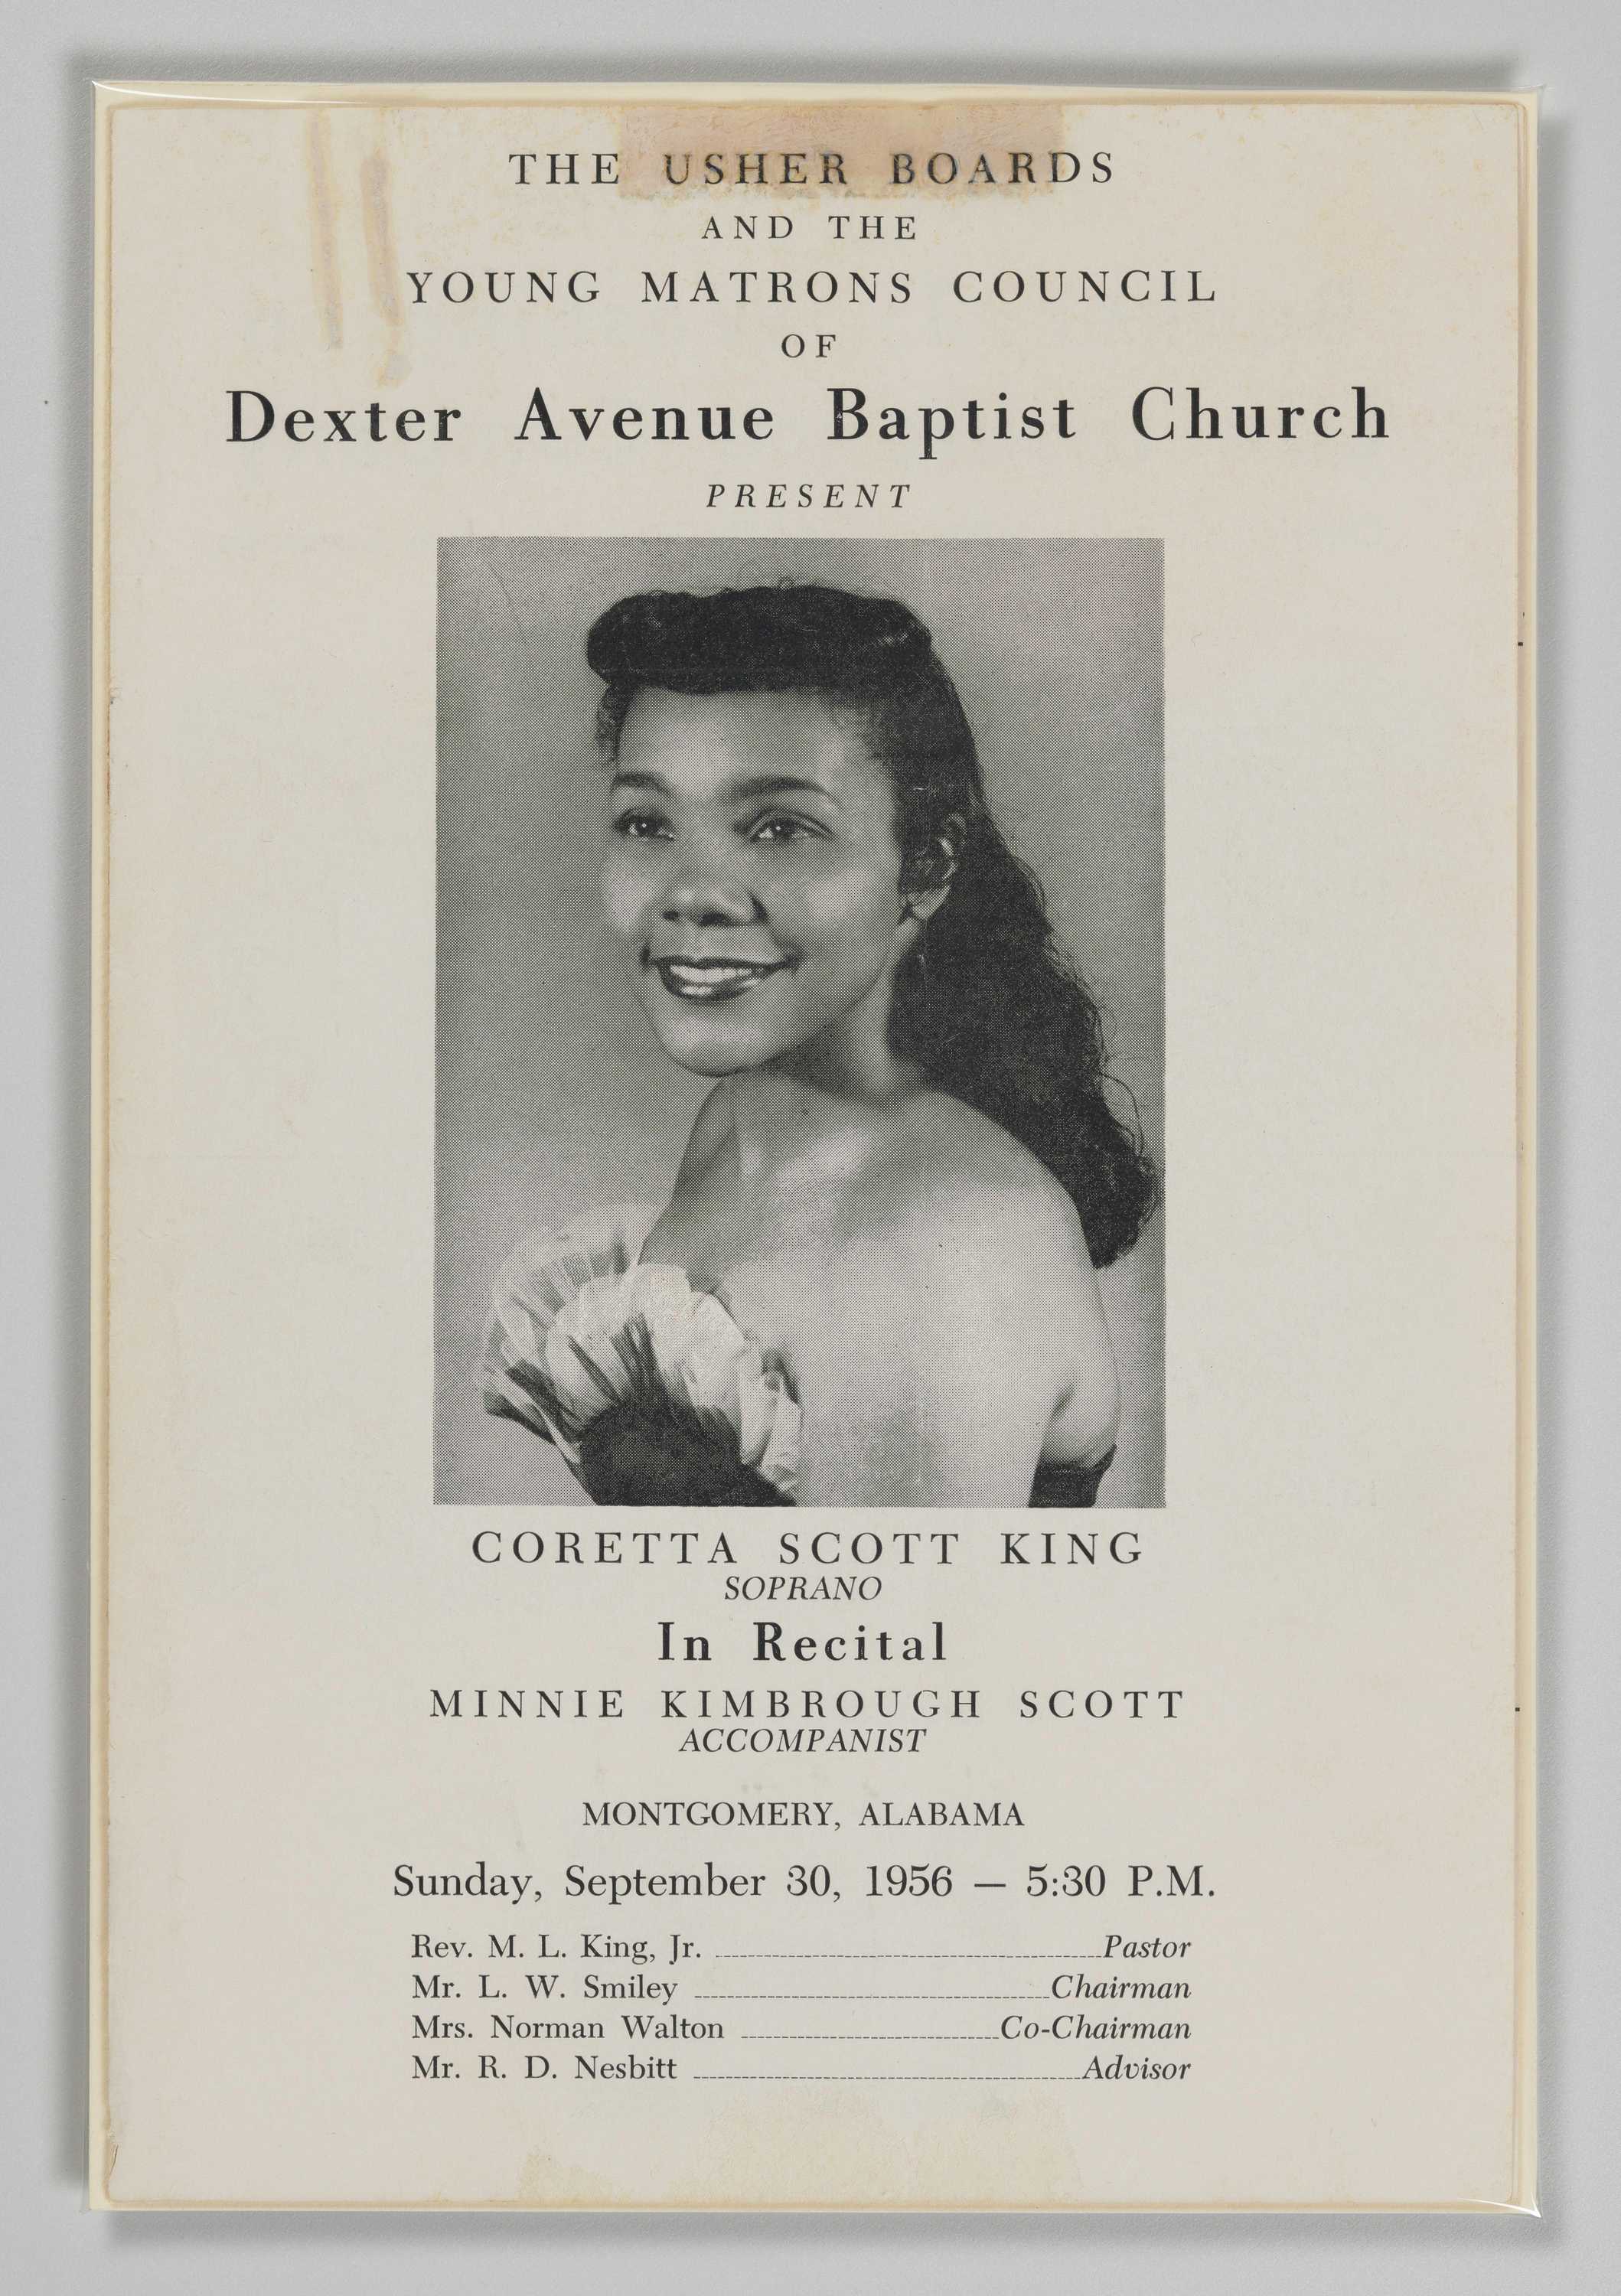 Image of a program for a Mrs. Coretta Scott King recital on September 30, 1956. The program features a photograph of King and information about the recital.